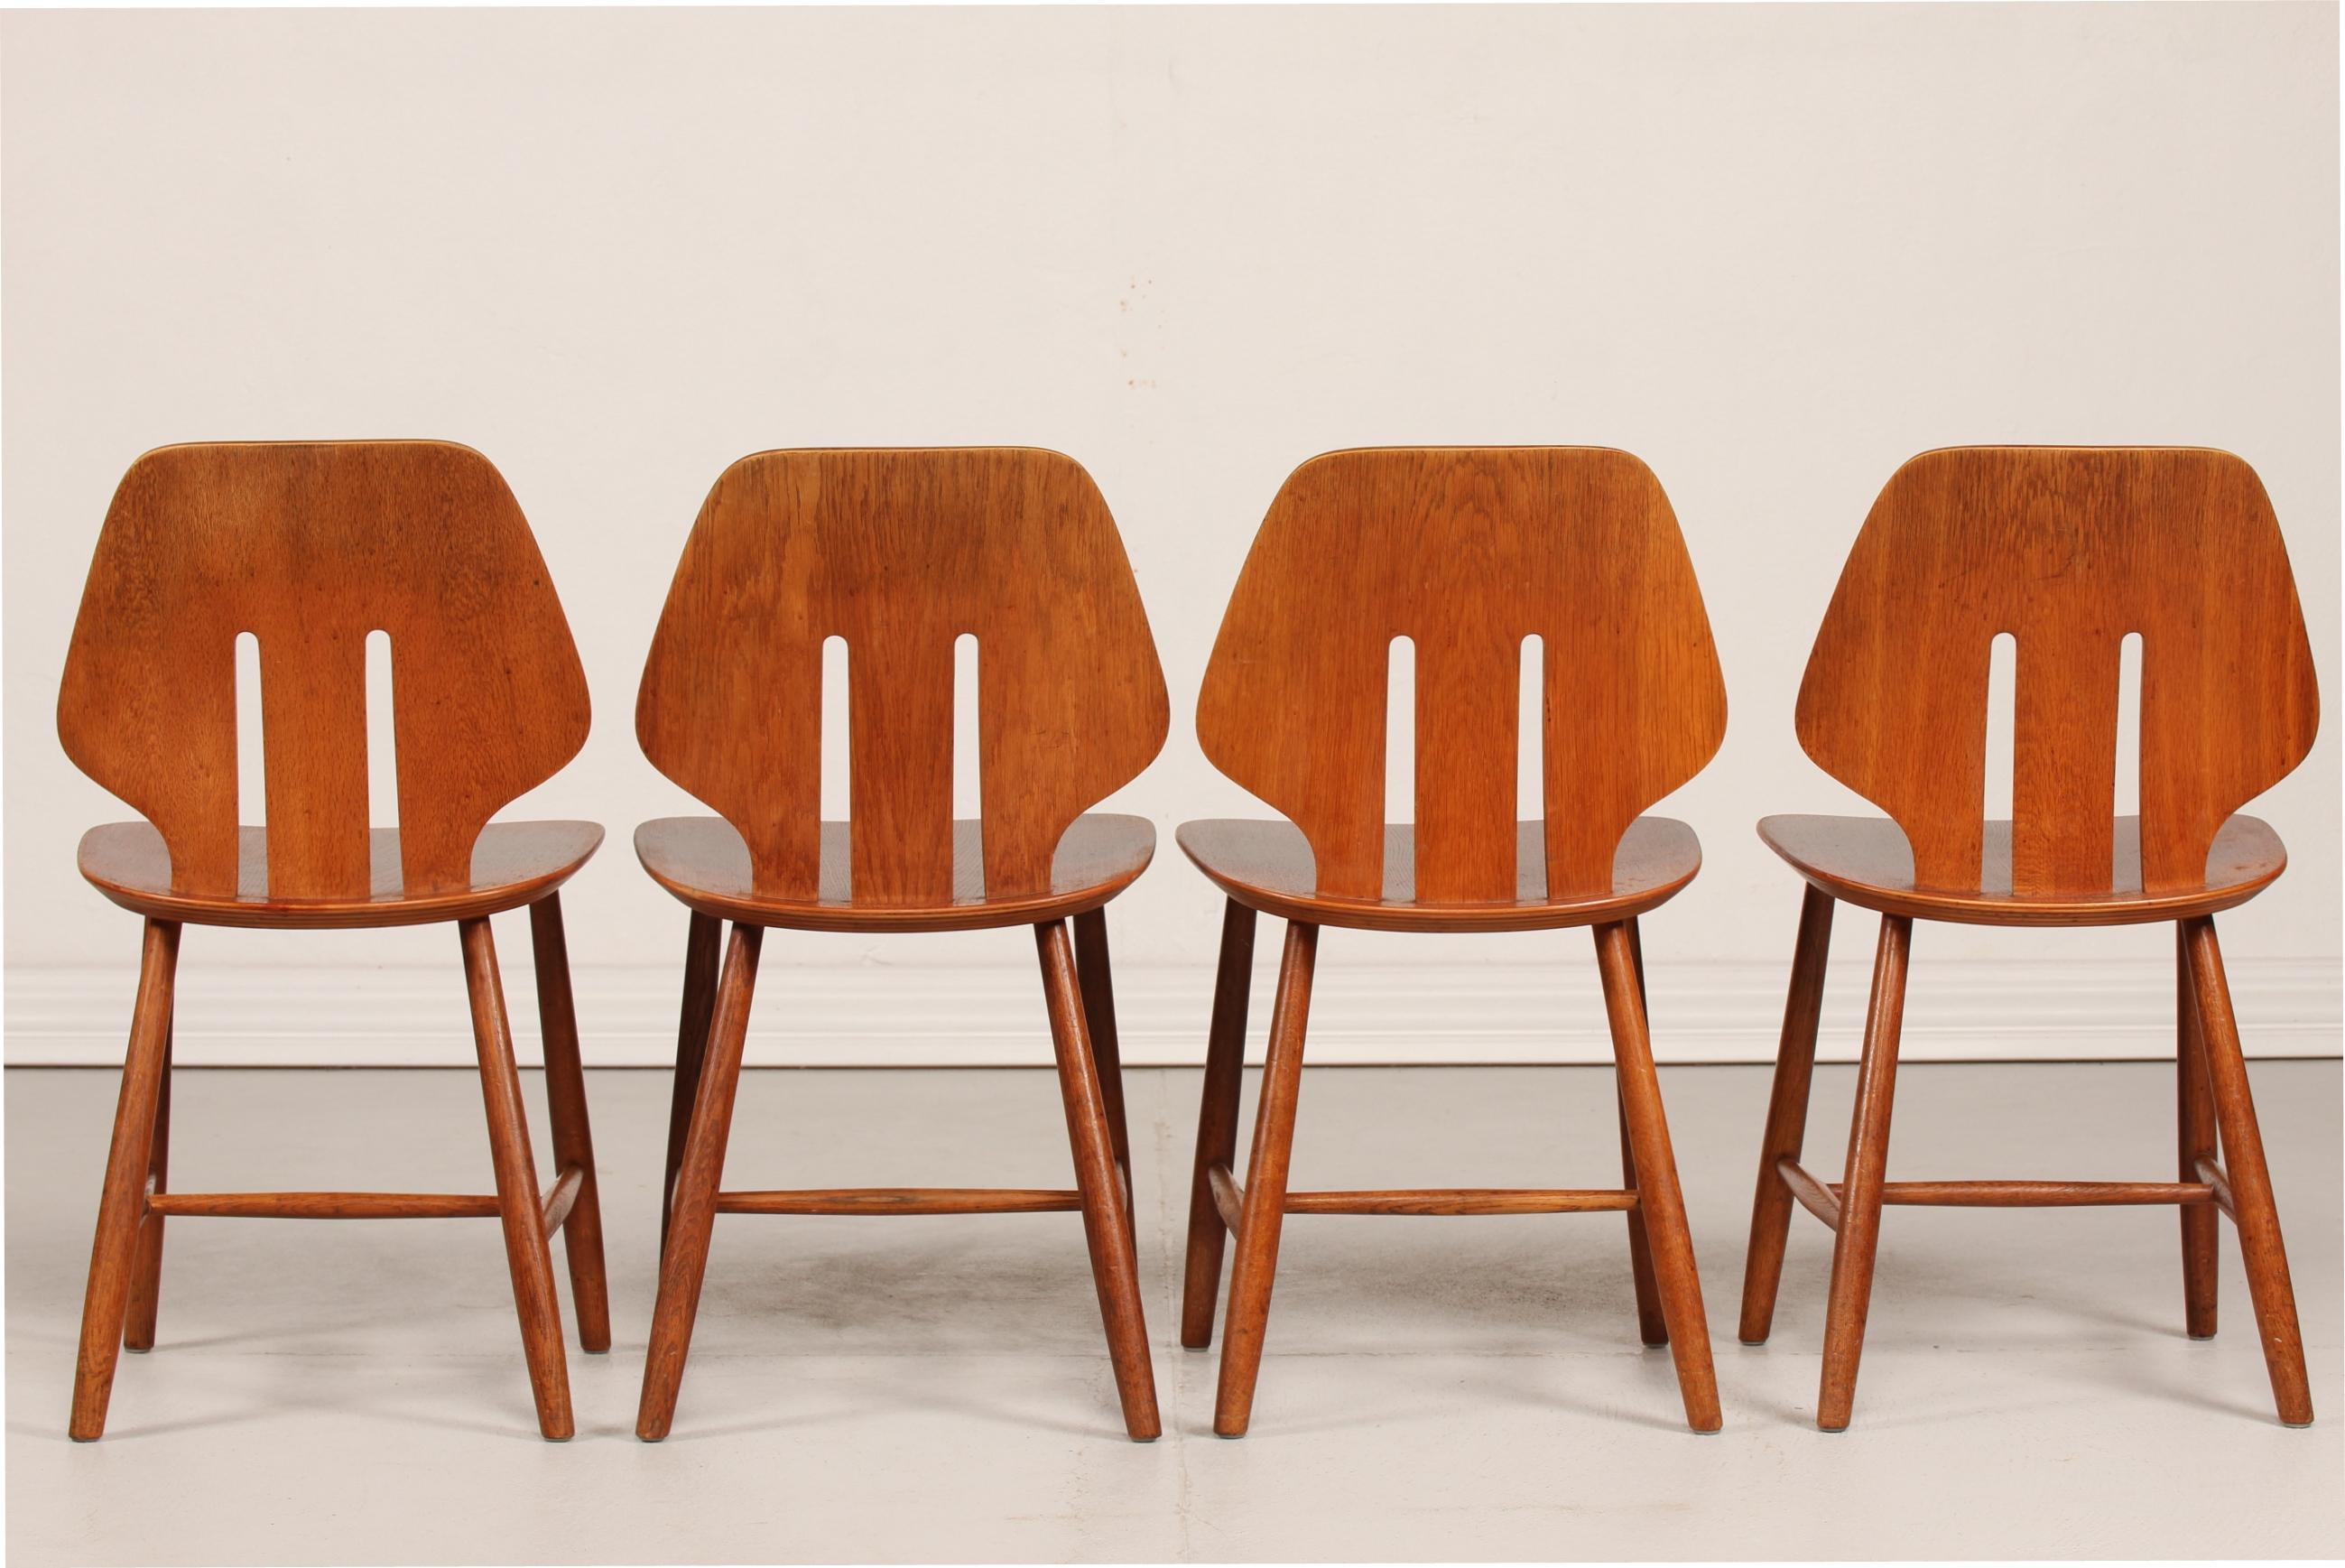 Mid-Century Modern Ejvind A Johansson Set of Four Chairs for FDB Model No. J 67 Made of Oak, 1950s